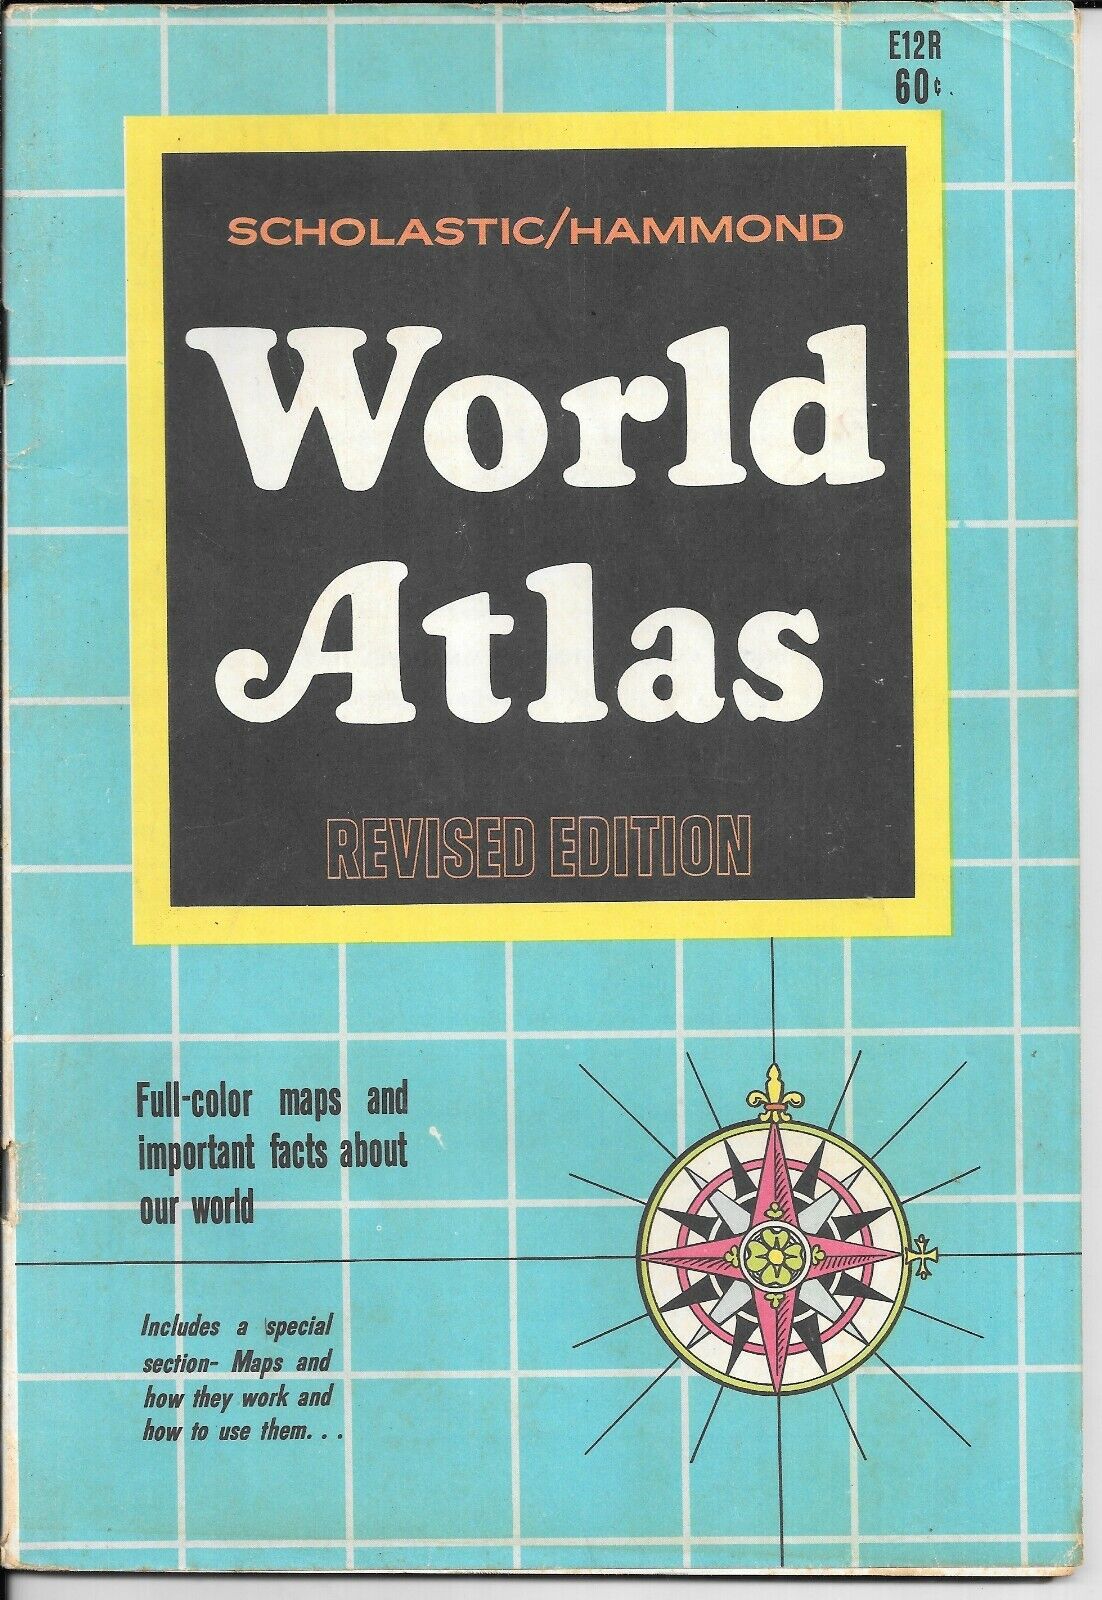 Vintage 1966 SCHOLASTIC/HAMMOND WORLD ATLAS Revised Edition, 62 Pages